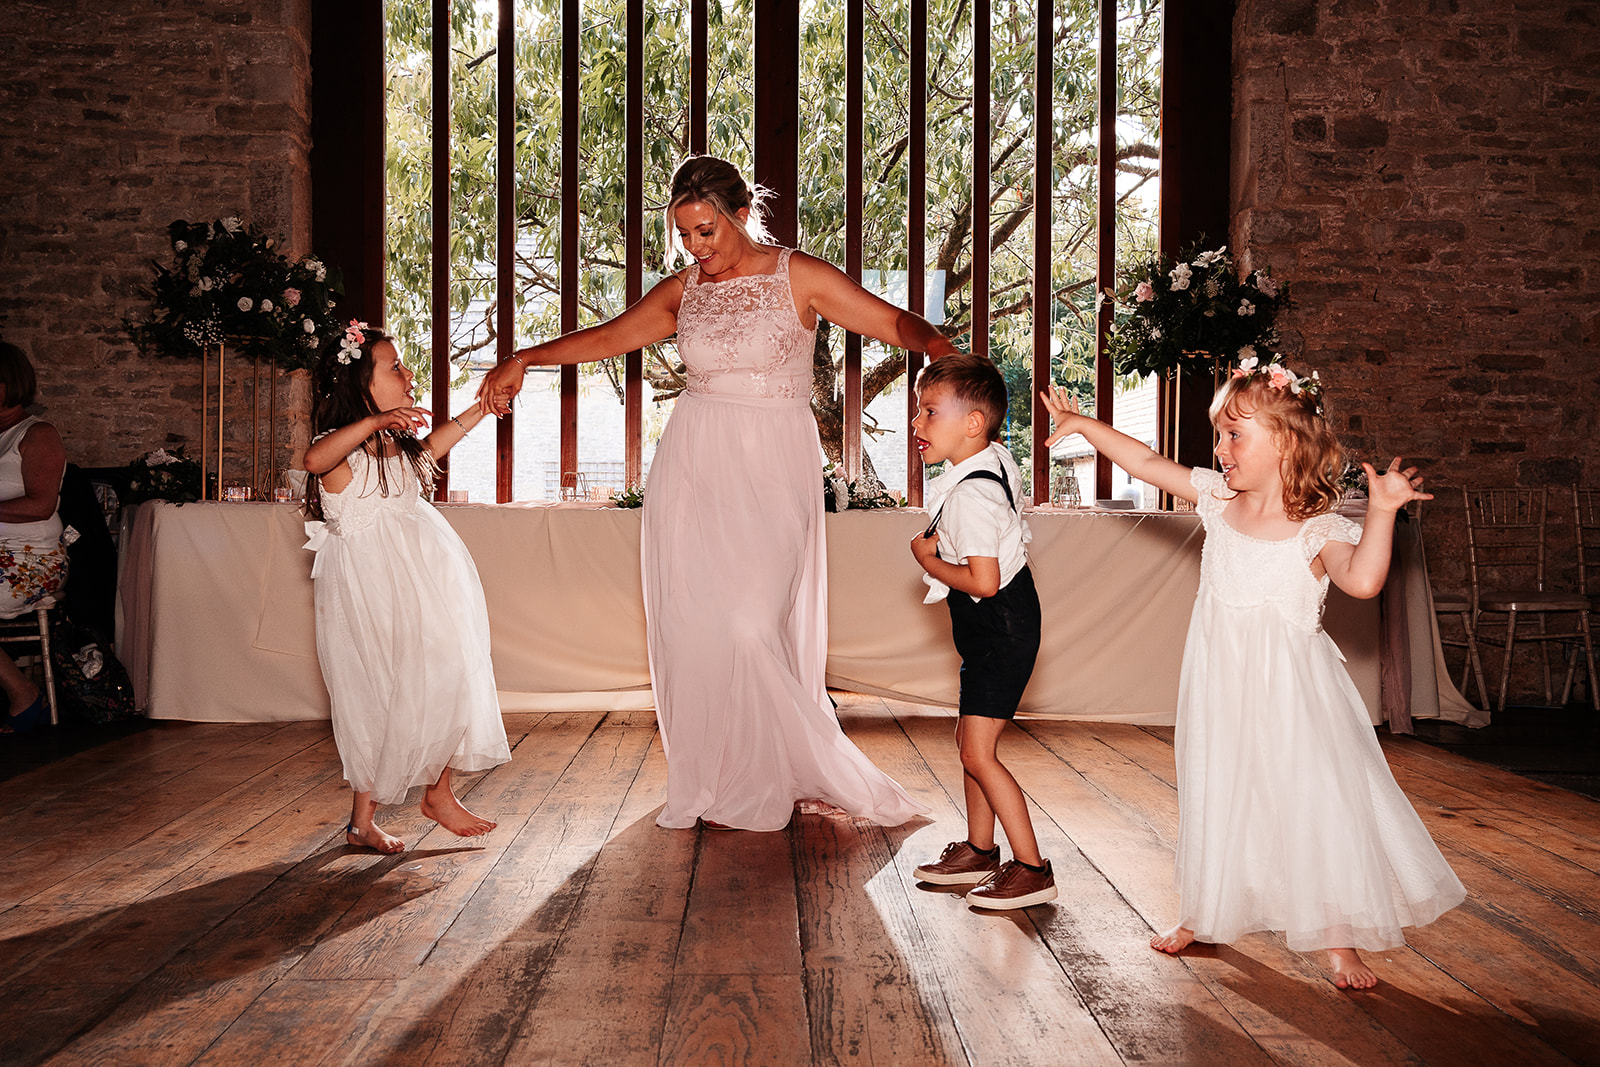 Wedding guests dancing in the rustic barn at Kingston Country Courtyard